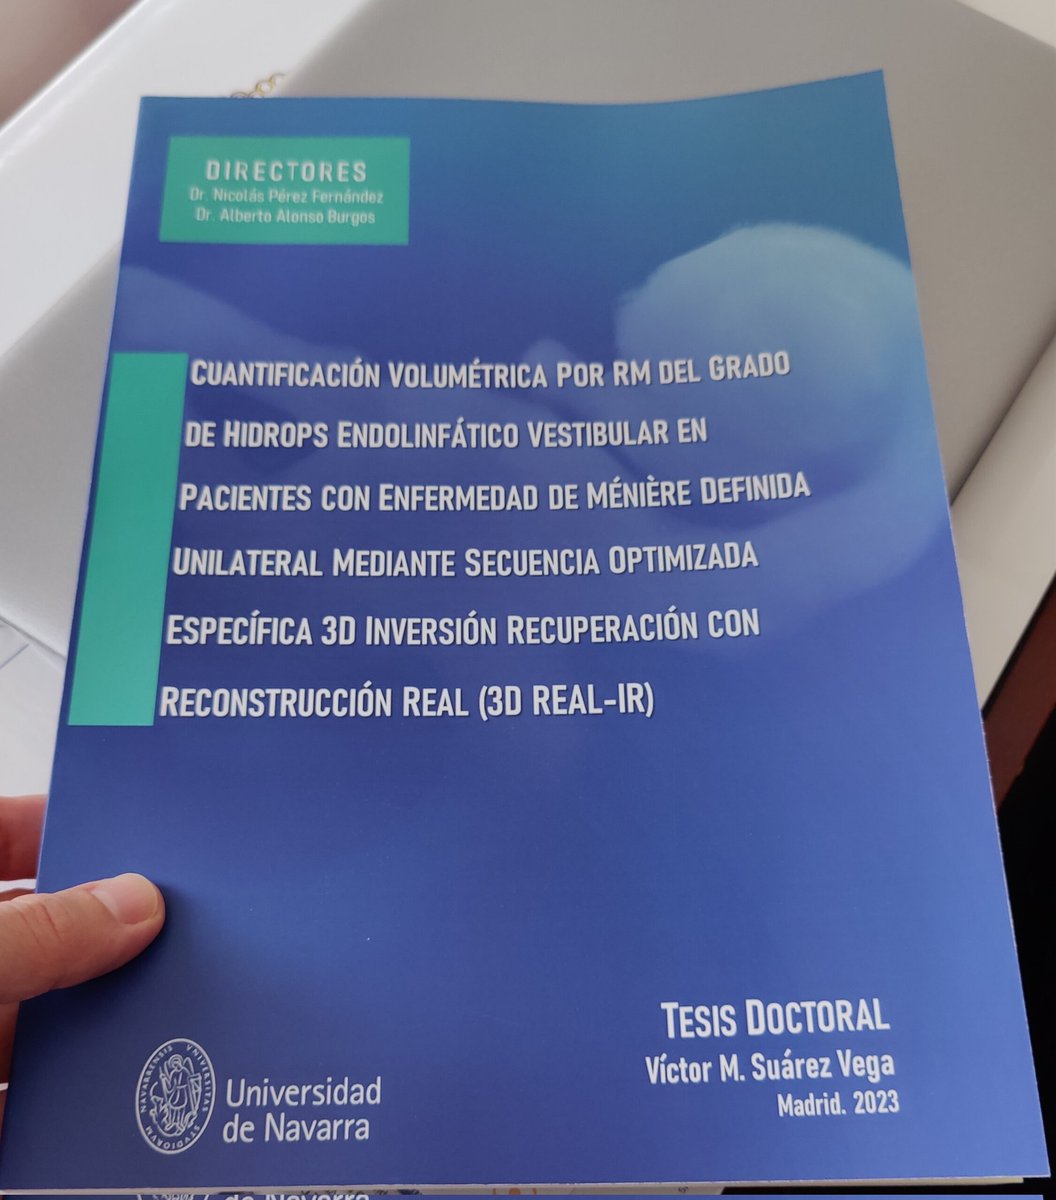 Deeply honored. PhD accomplished at @unav. Quantitaitve #MRI in Meniere'sdisease. My gratitude to my directors -and friends- Drs. @AAlonsoBurgos and Nicolás Pérez and the president @GBastarrika